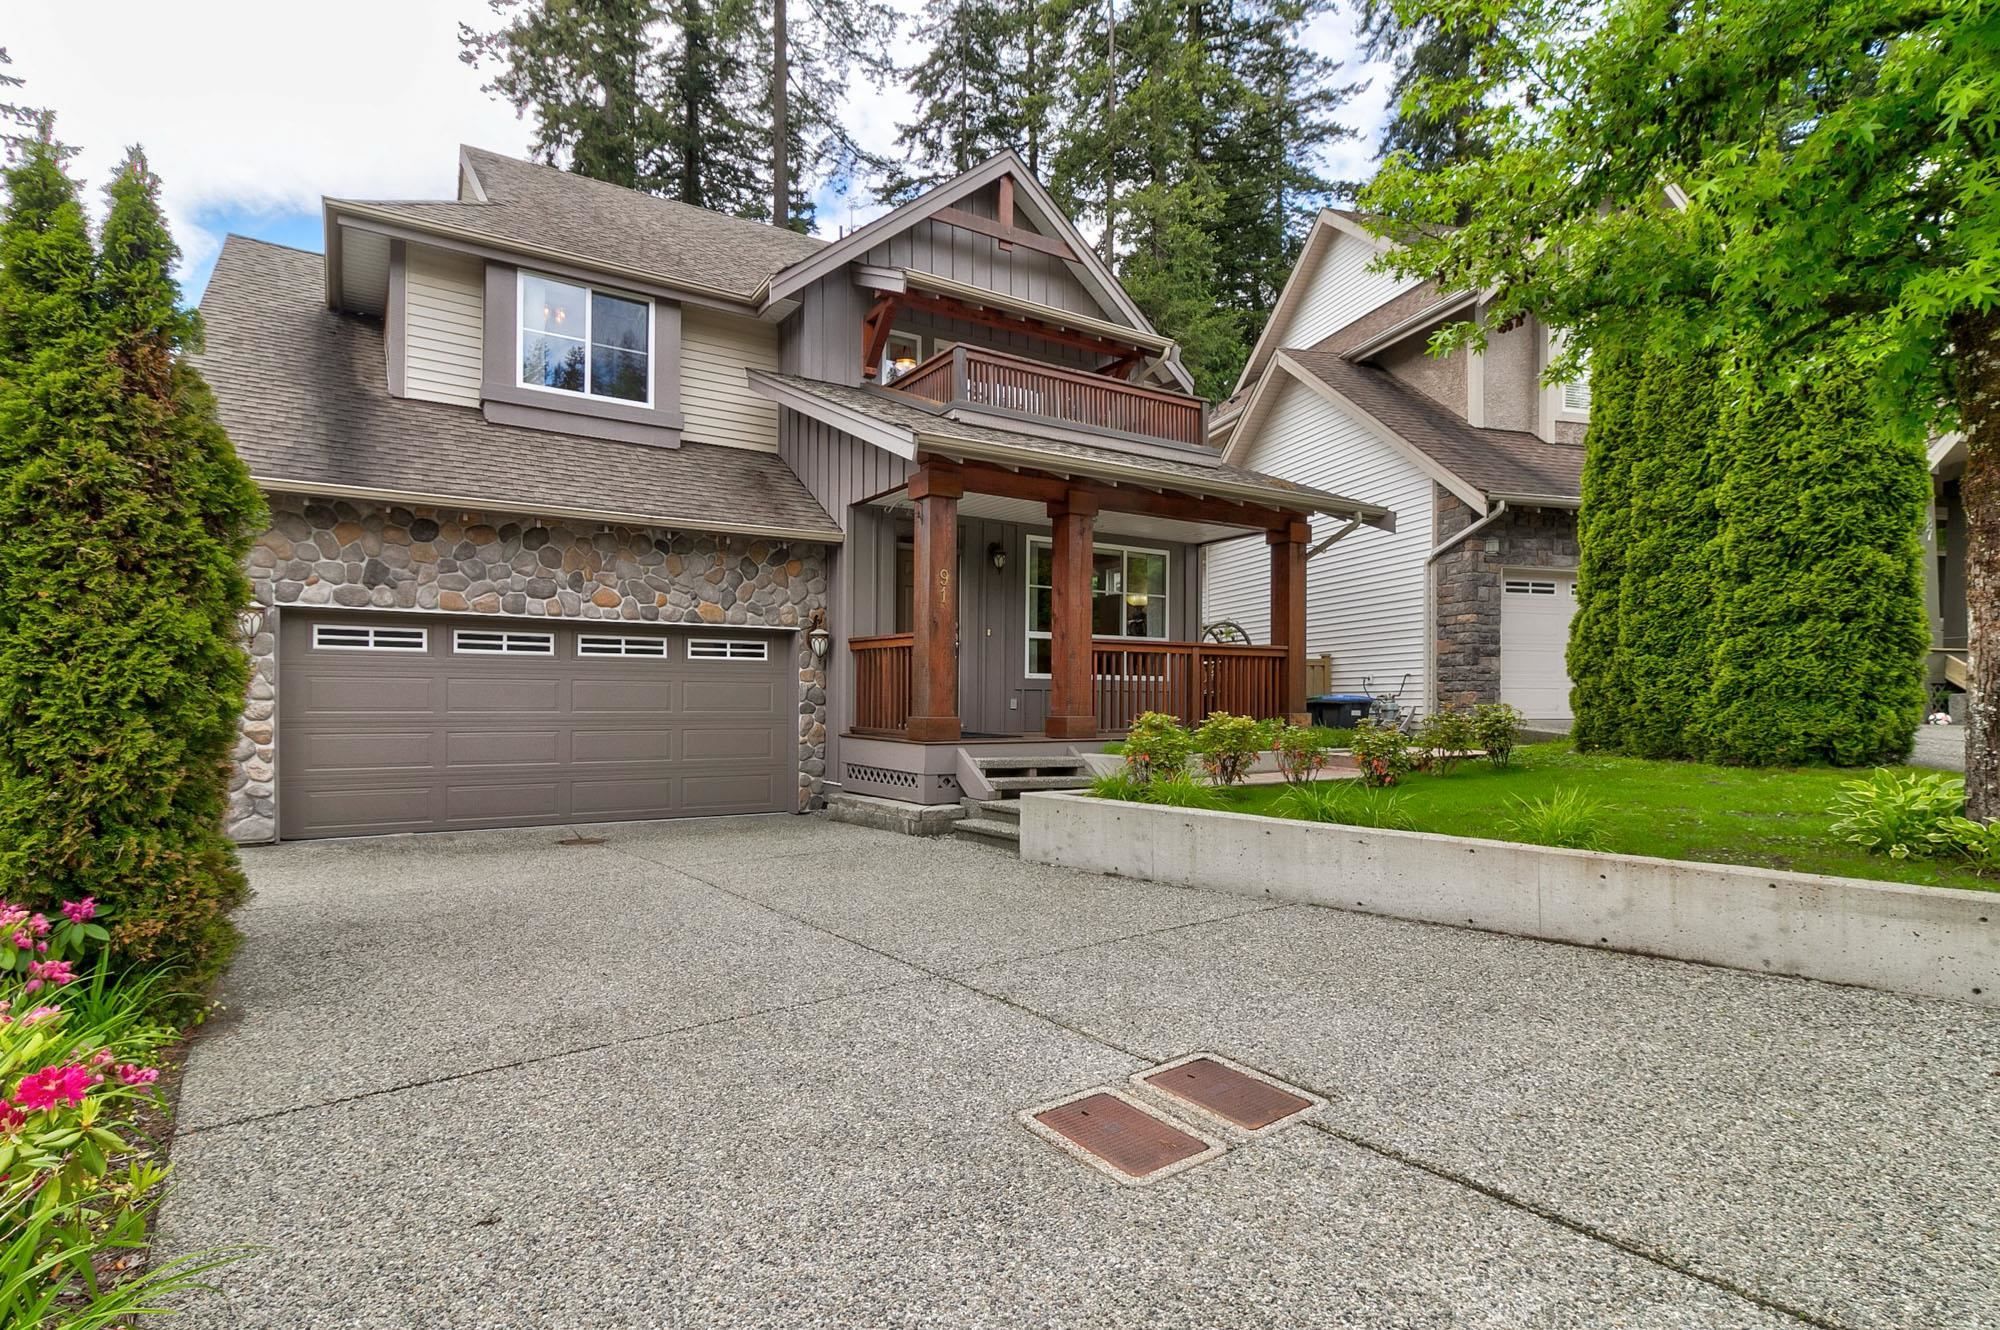 New property listed in Heritage Woods PM, Port Moody